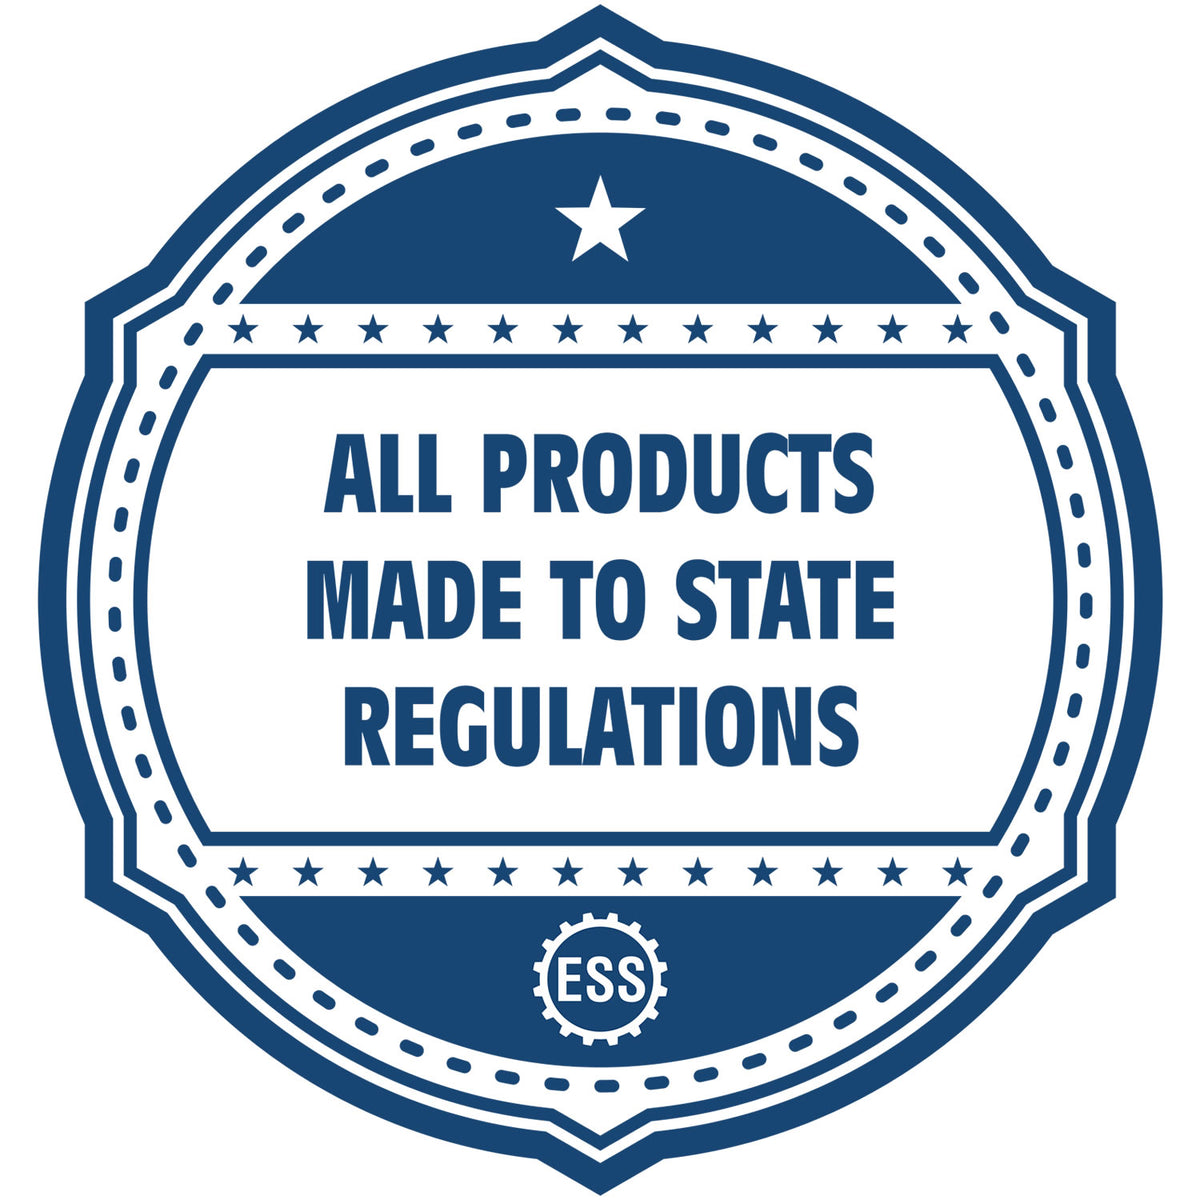 An icon or badge element for the PSI Alaska Notary Stamp showing that this product is made in compliance with state regulations.